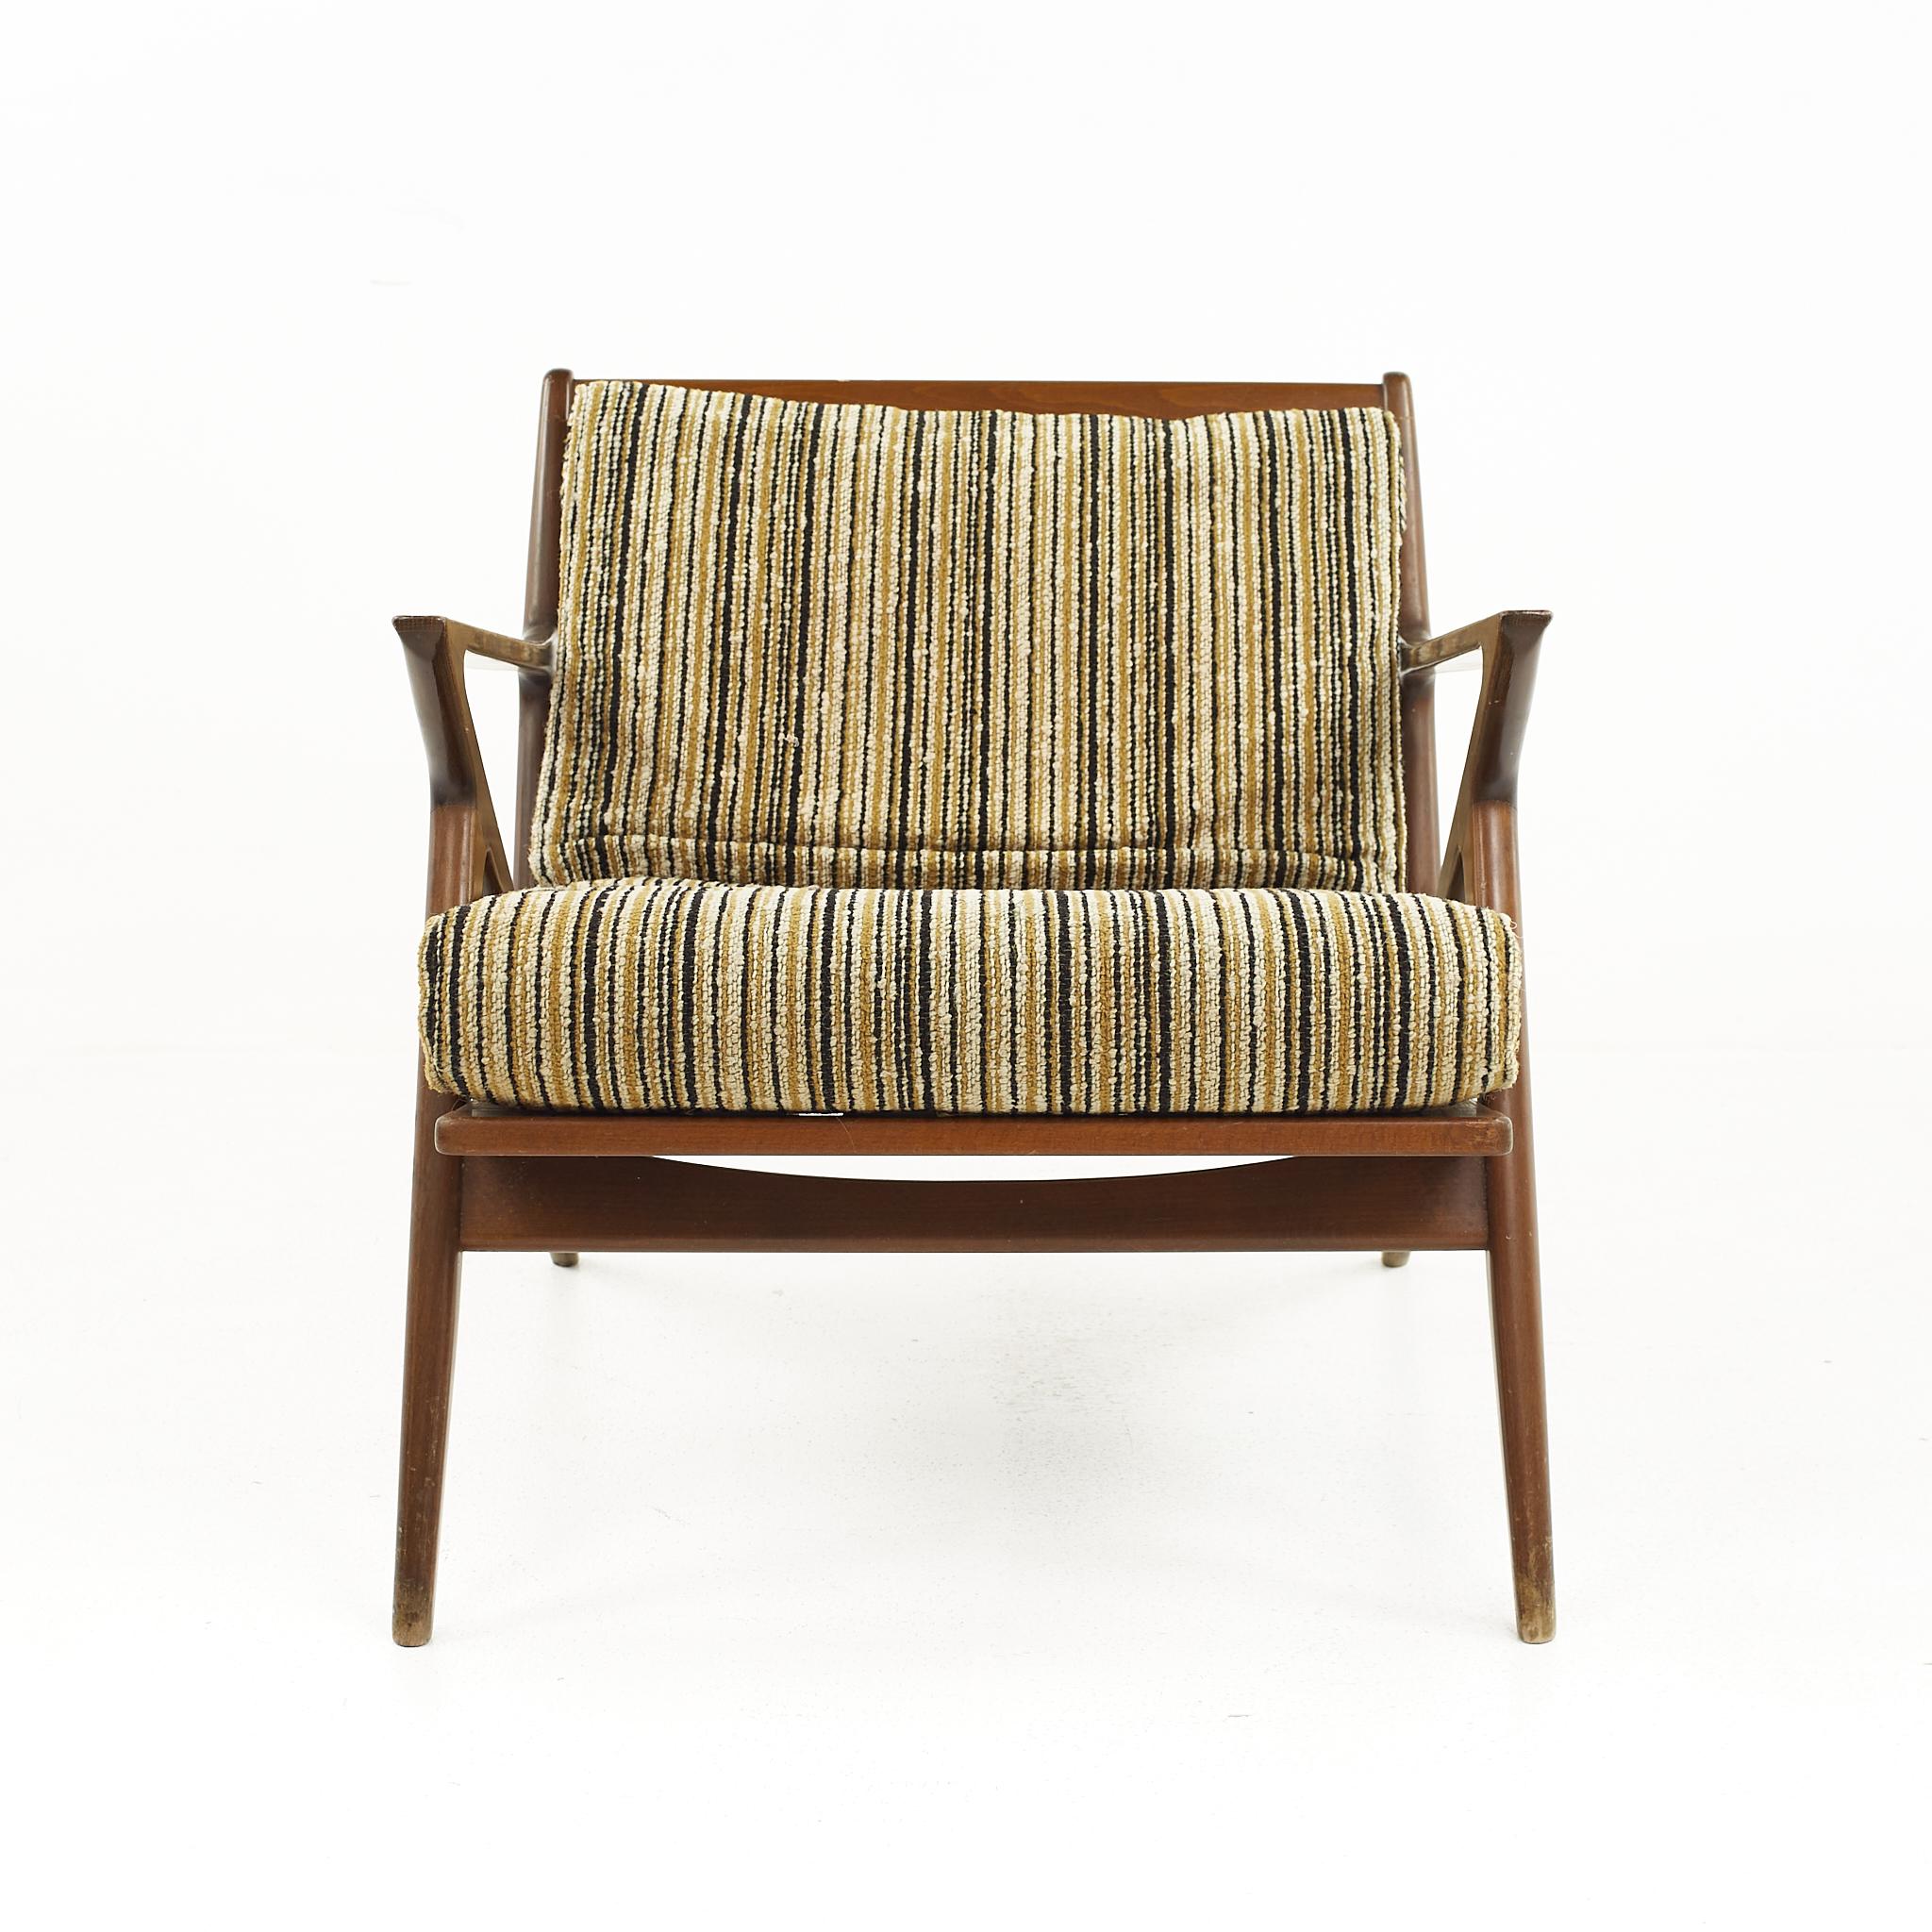 Poul Jensen for Selig Mid Century Z Lounge Chair

The chair measures: 29.5 wide x 31.5 deep x 26.5 high, with a seat height of 16 inches and arm height/chair clearance of 22.25 inches

All pieces of furniture can be had in what we call restored